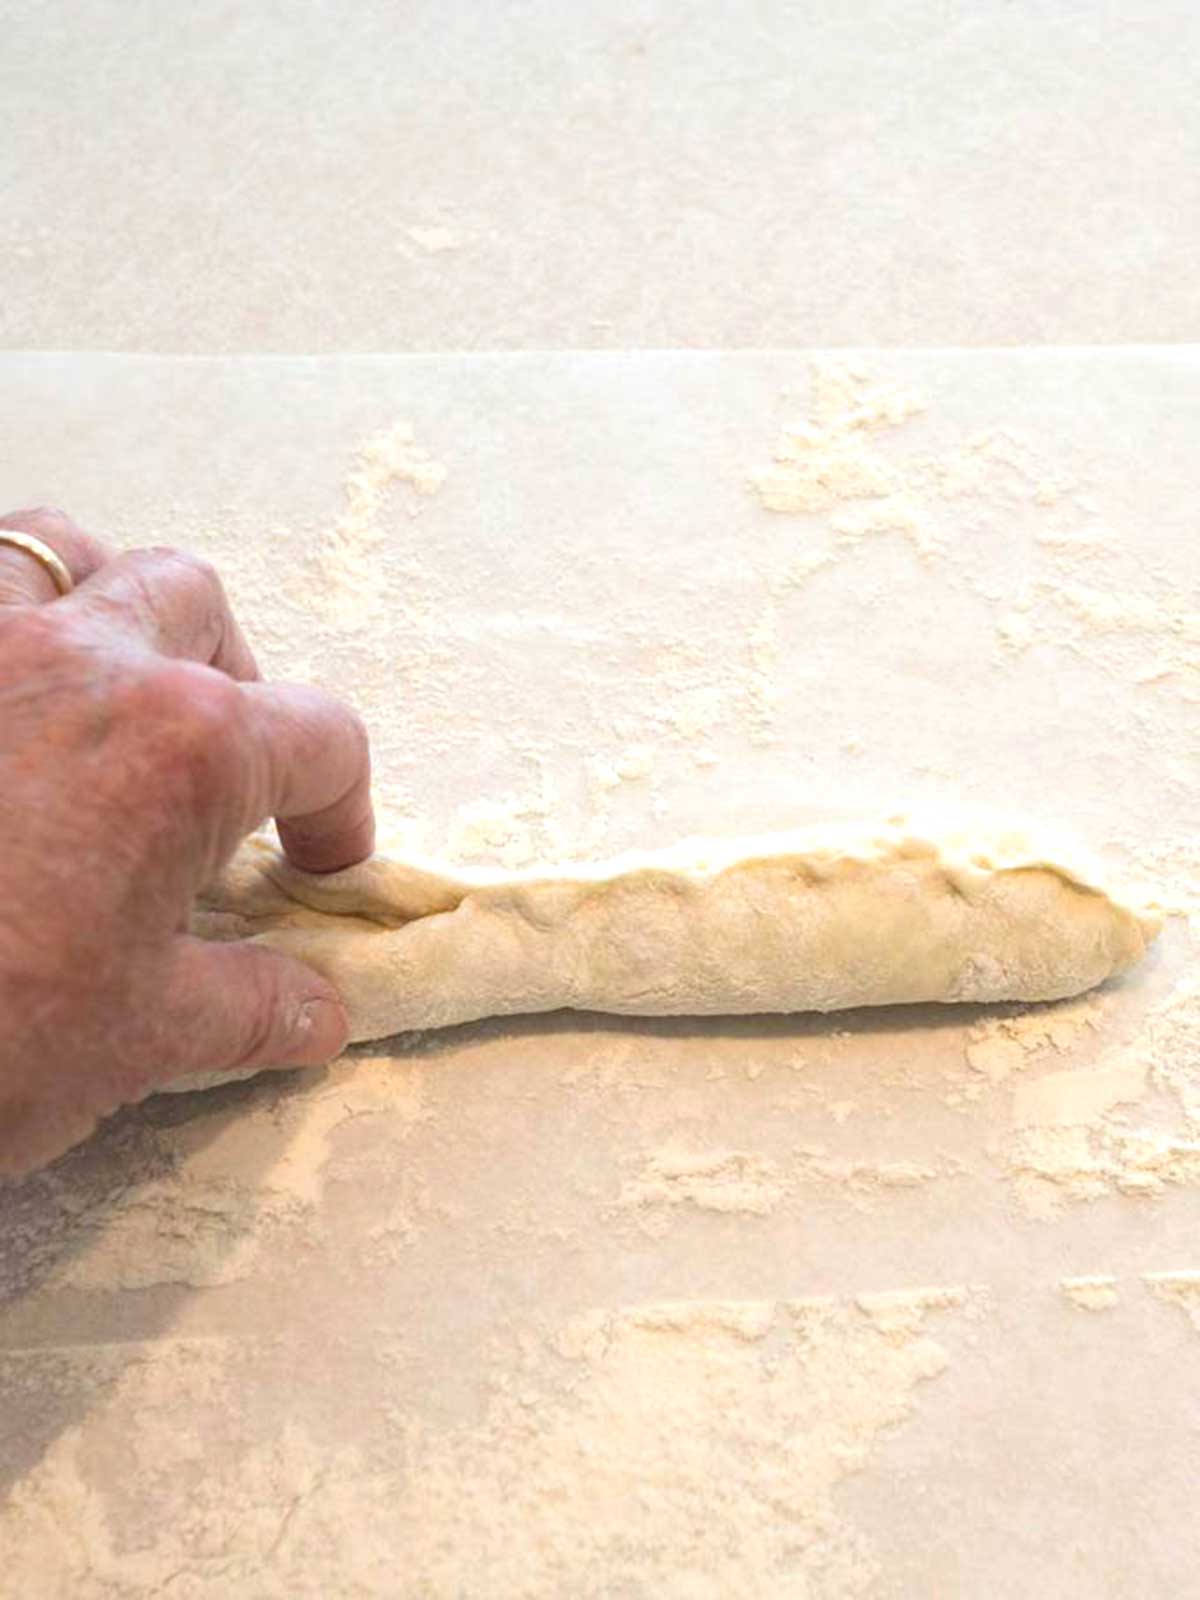 Pinching the edges the dough to form the French bread.